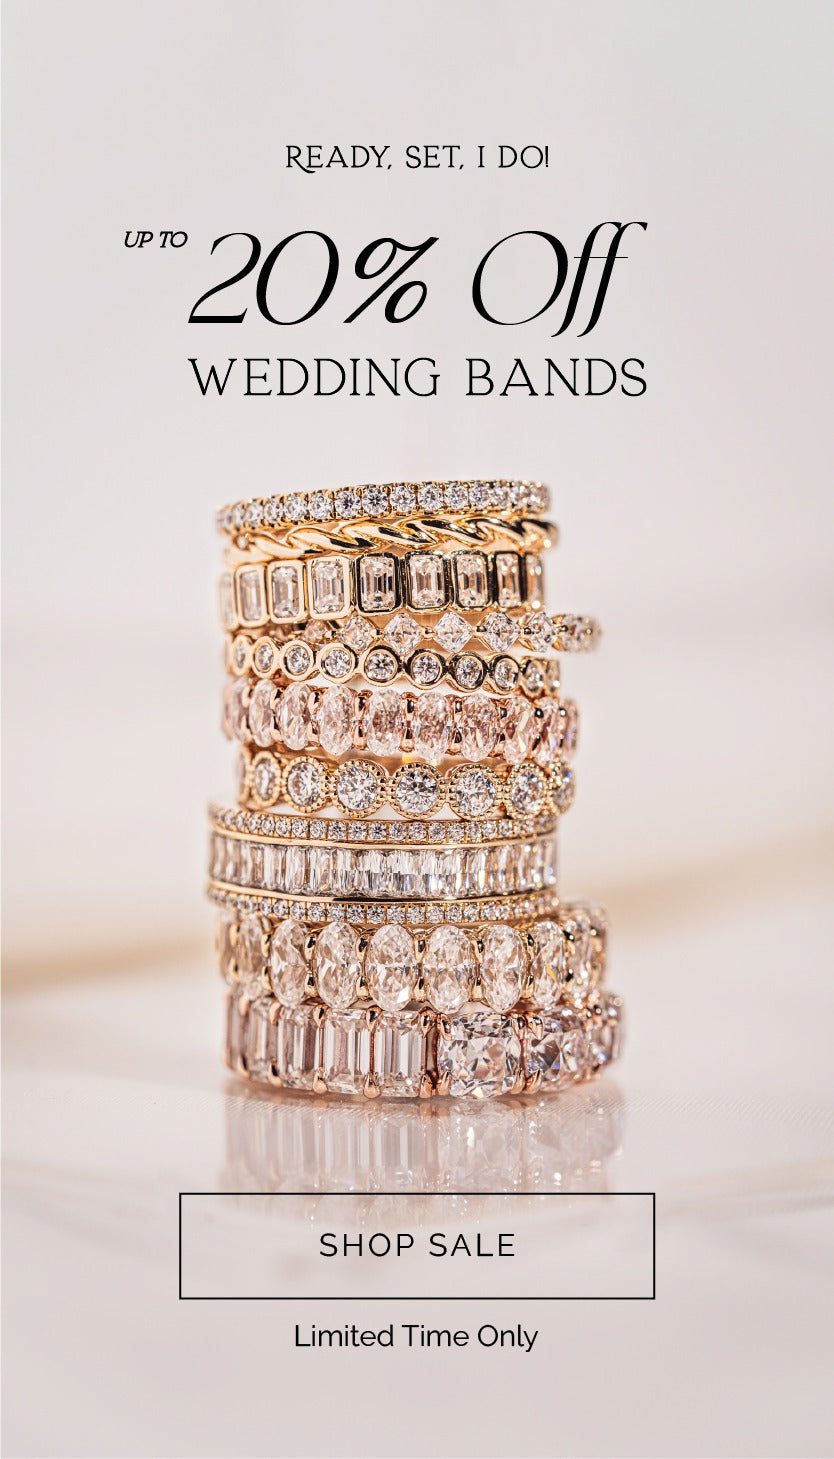 Save Up To 20% On Wedding Bands 